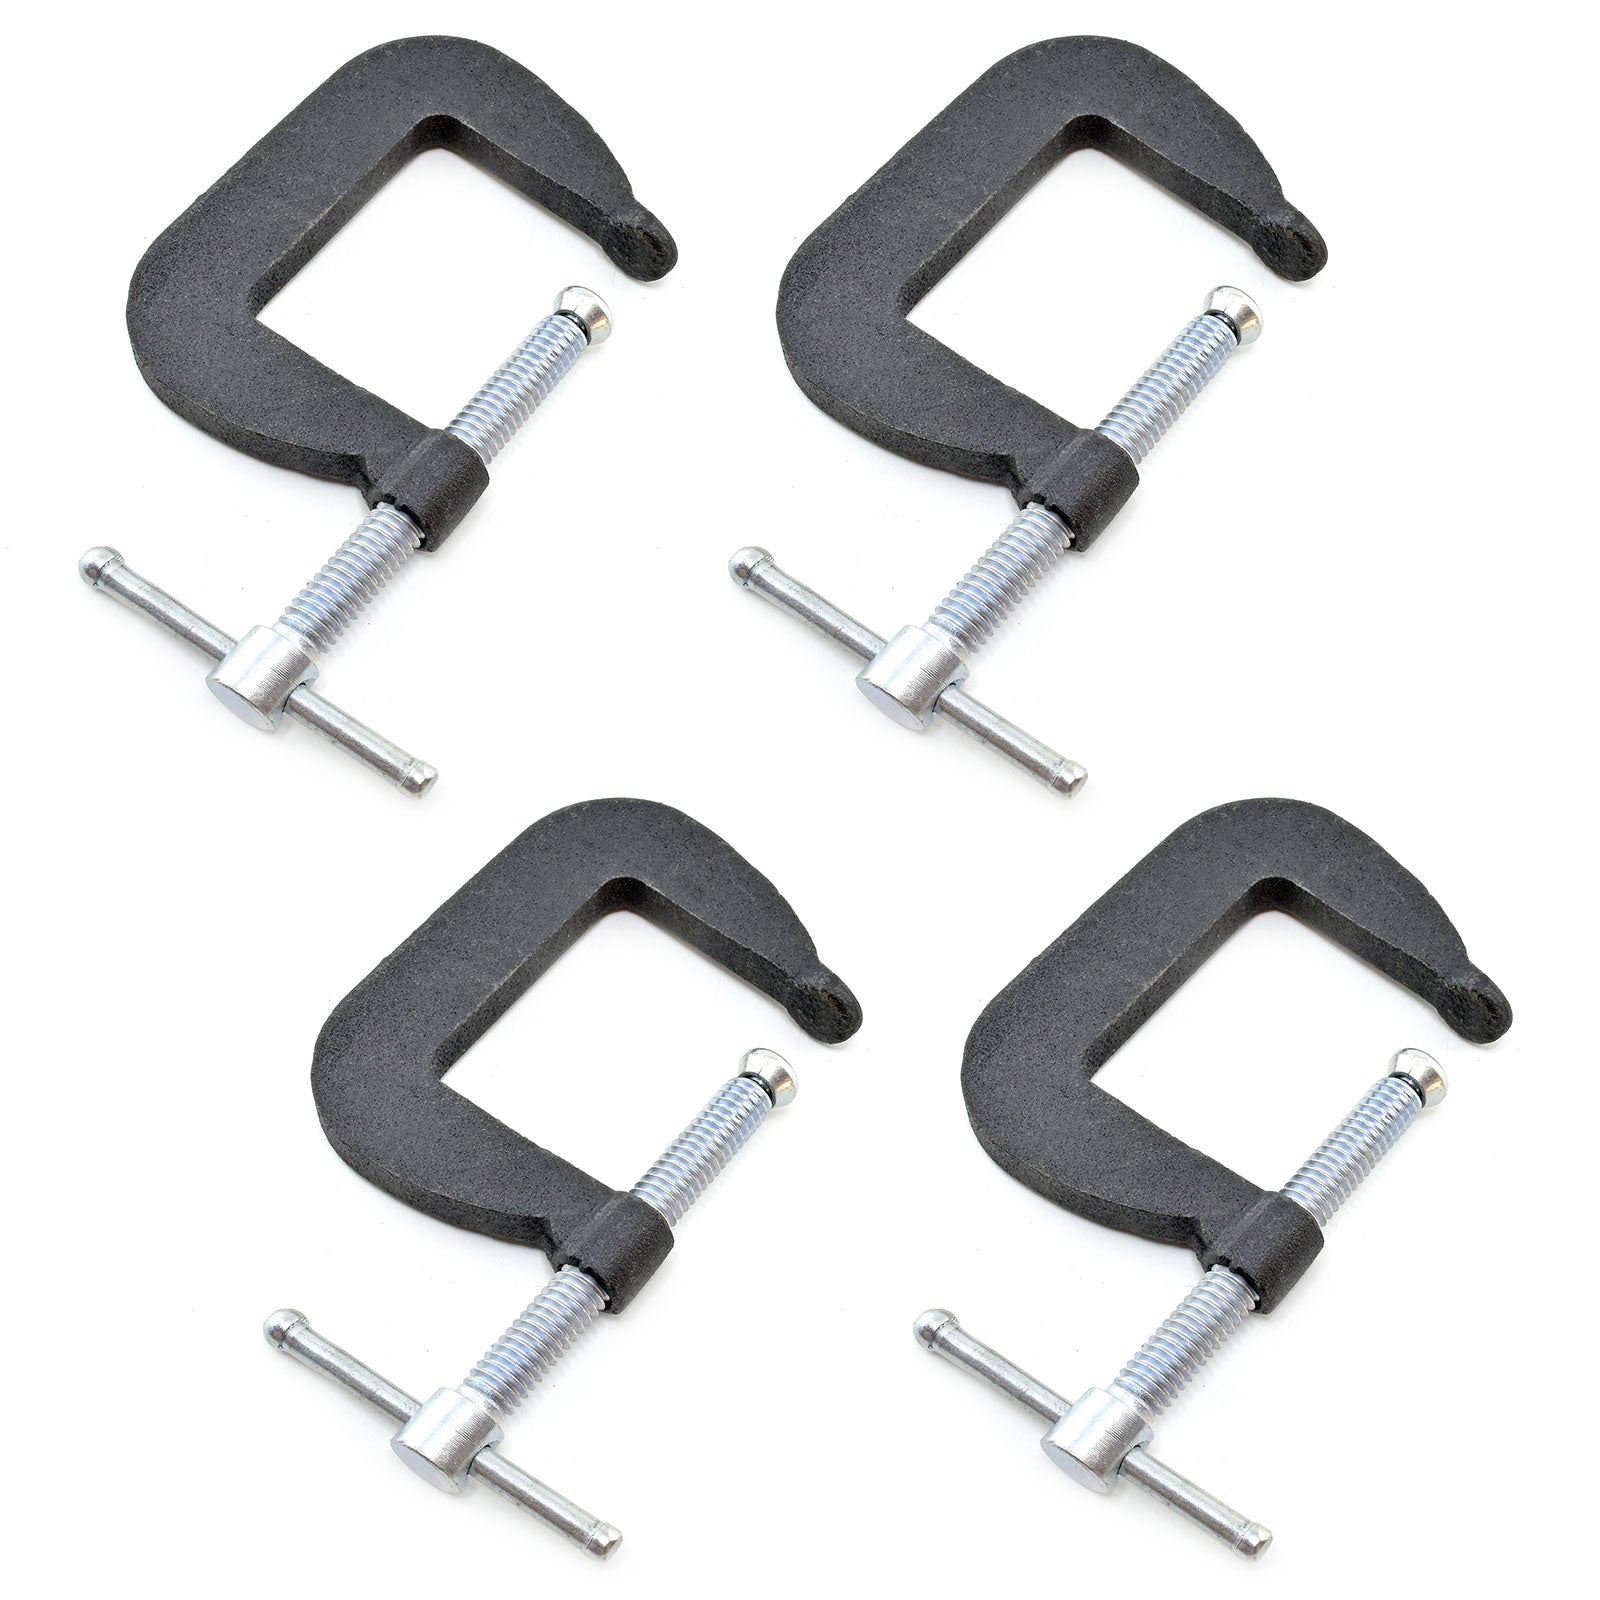 1.5" x 1.5" Miniature Forged Steel C - clamp, Set of 4